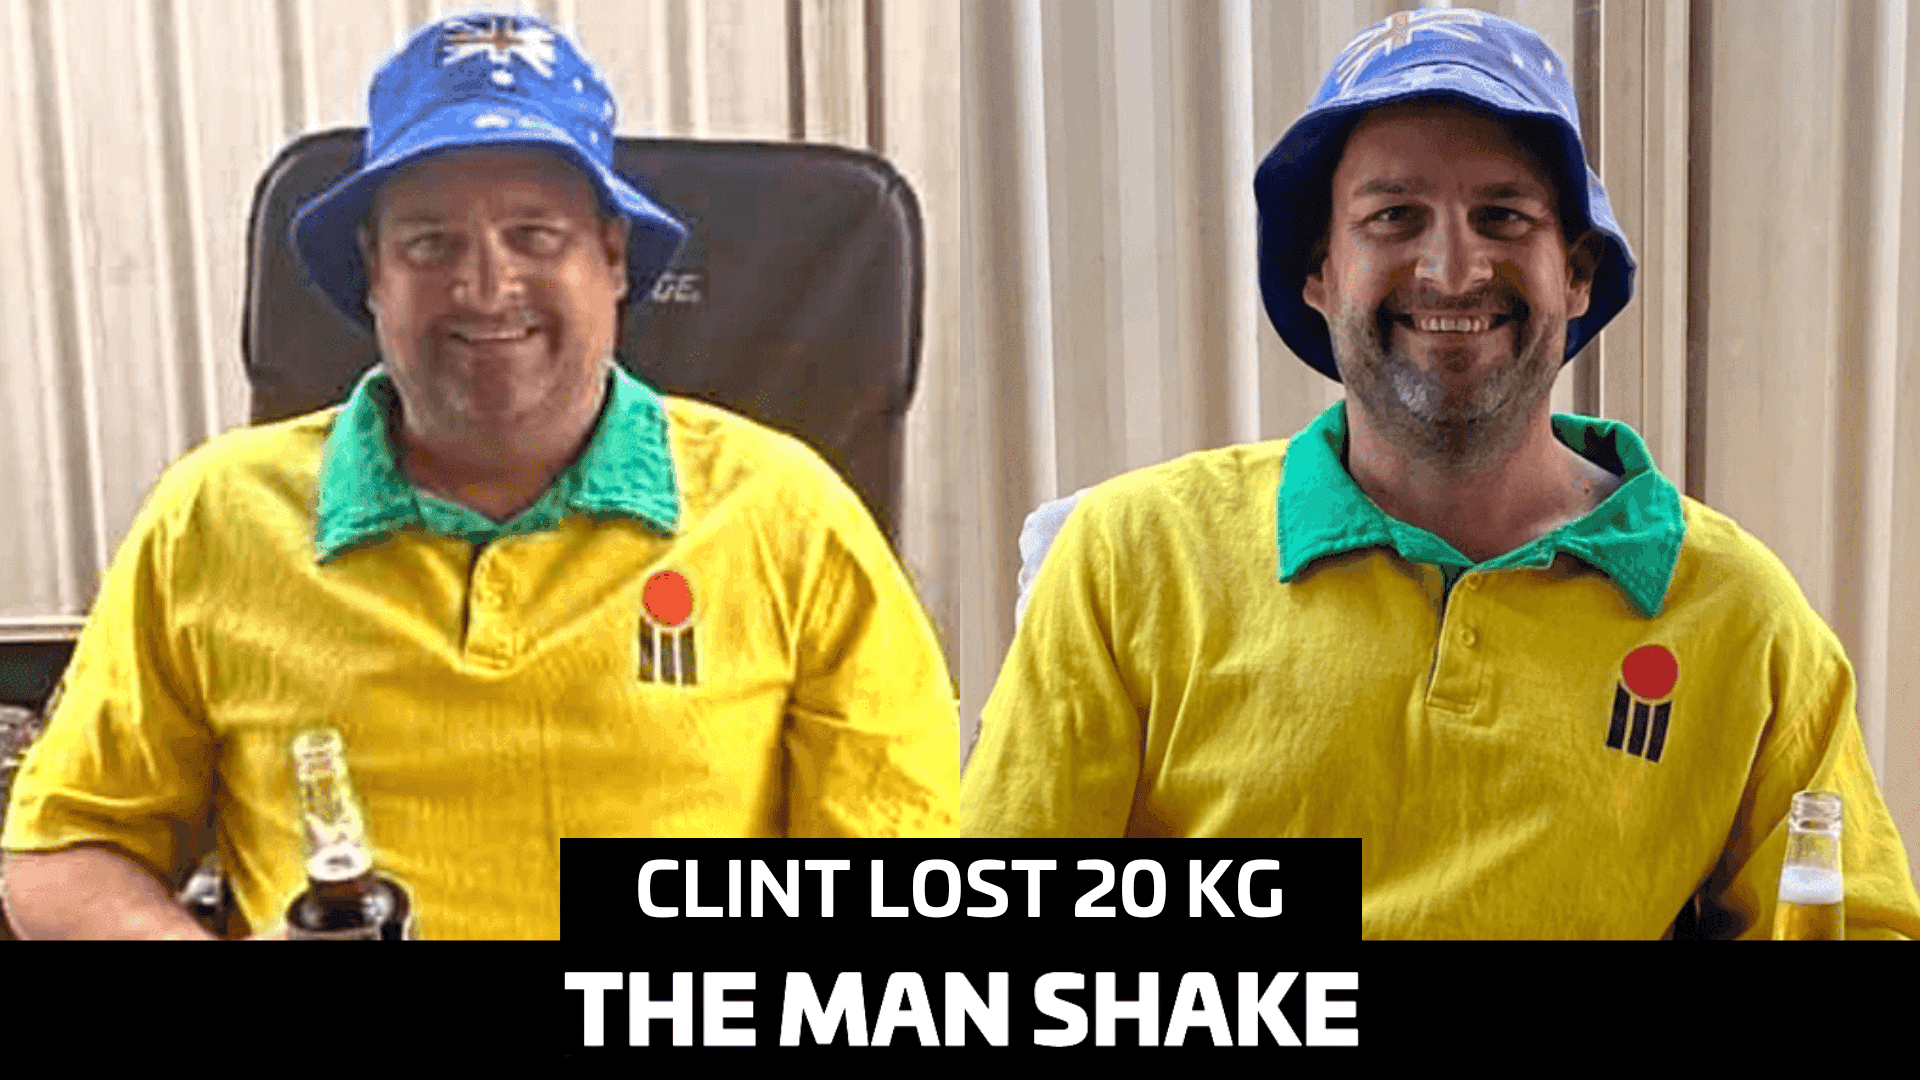 Clint struggled to play with his kids so he lost 20kg